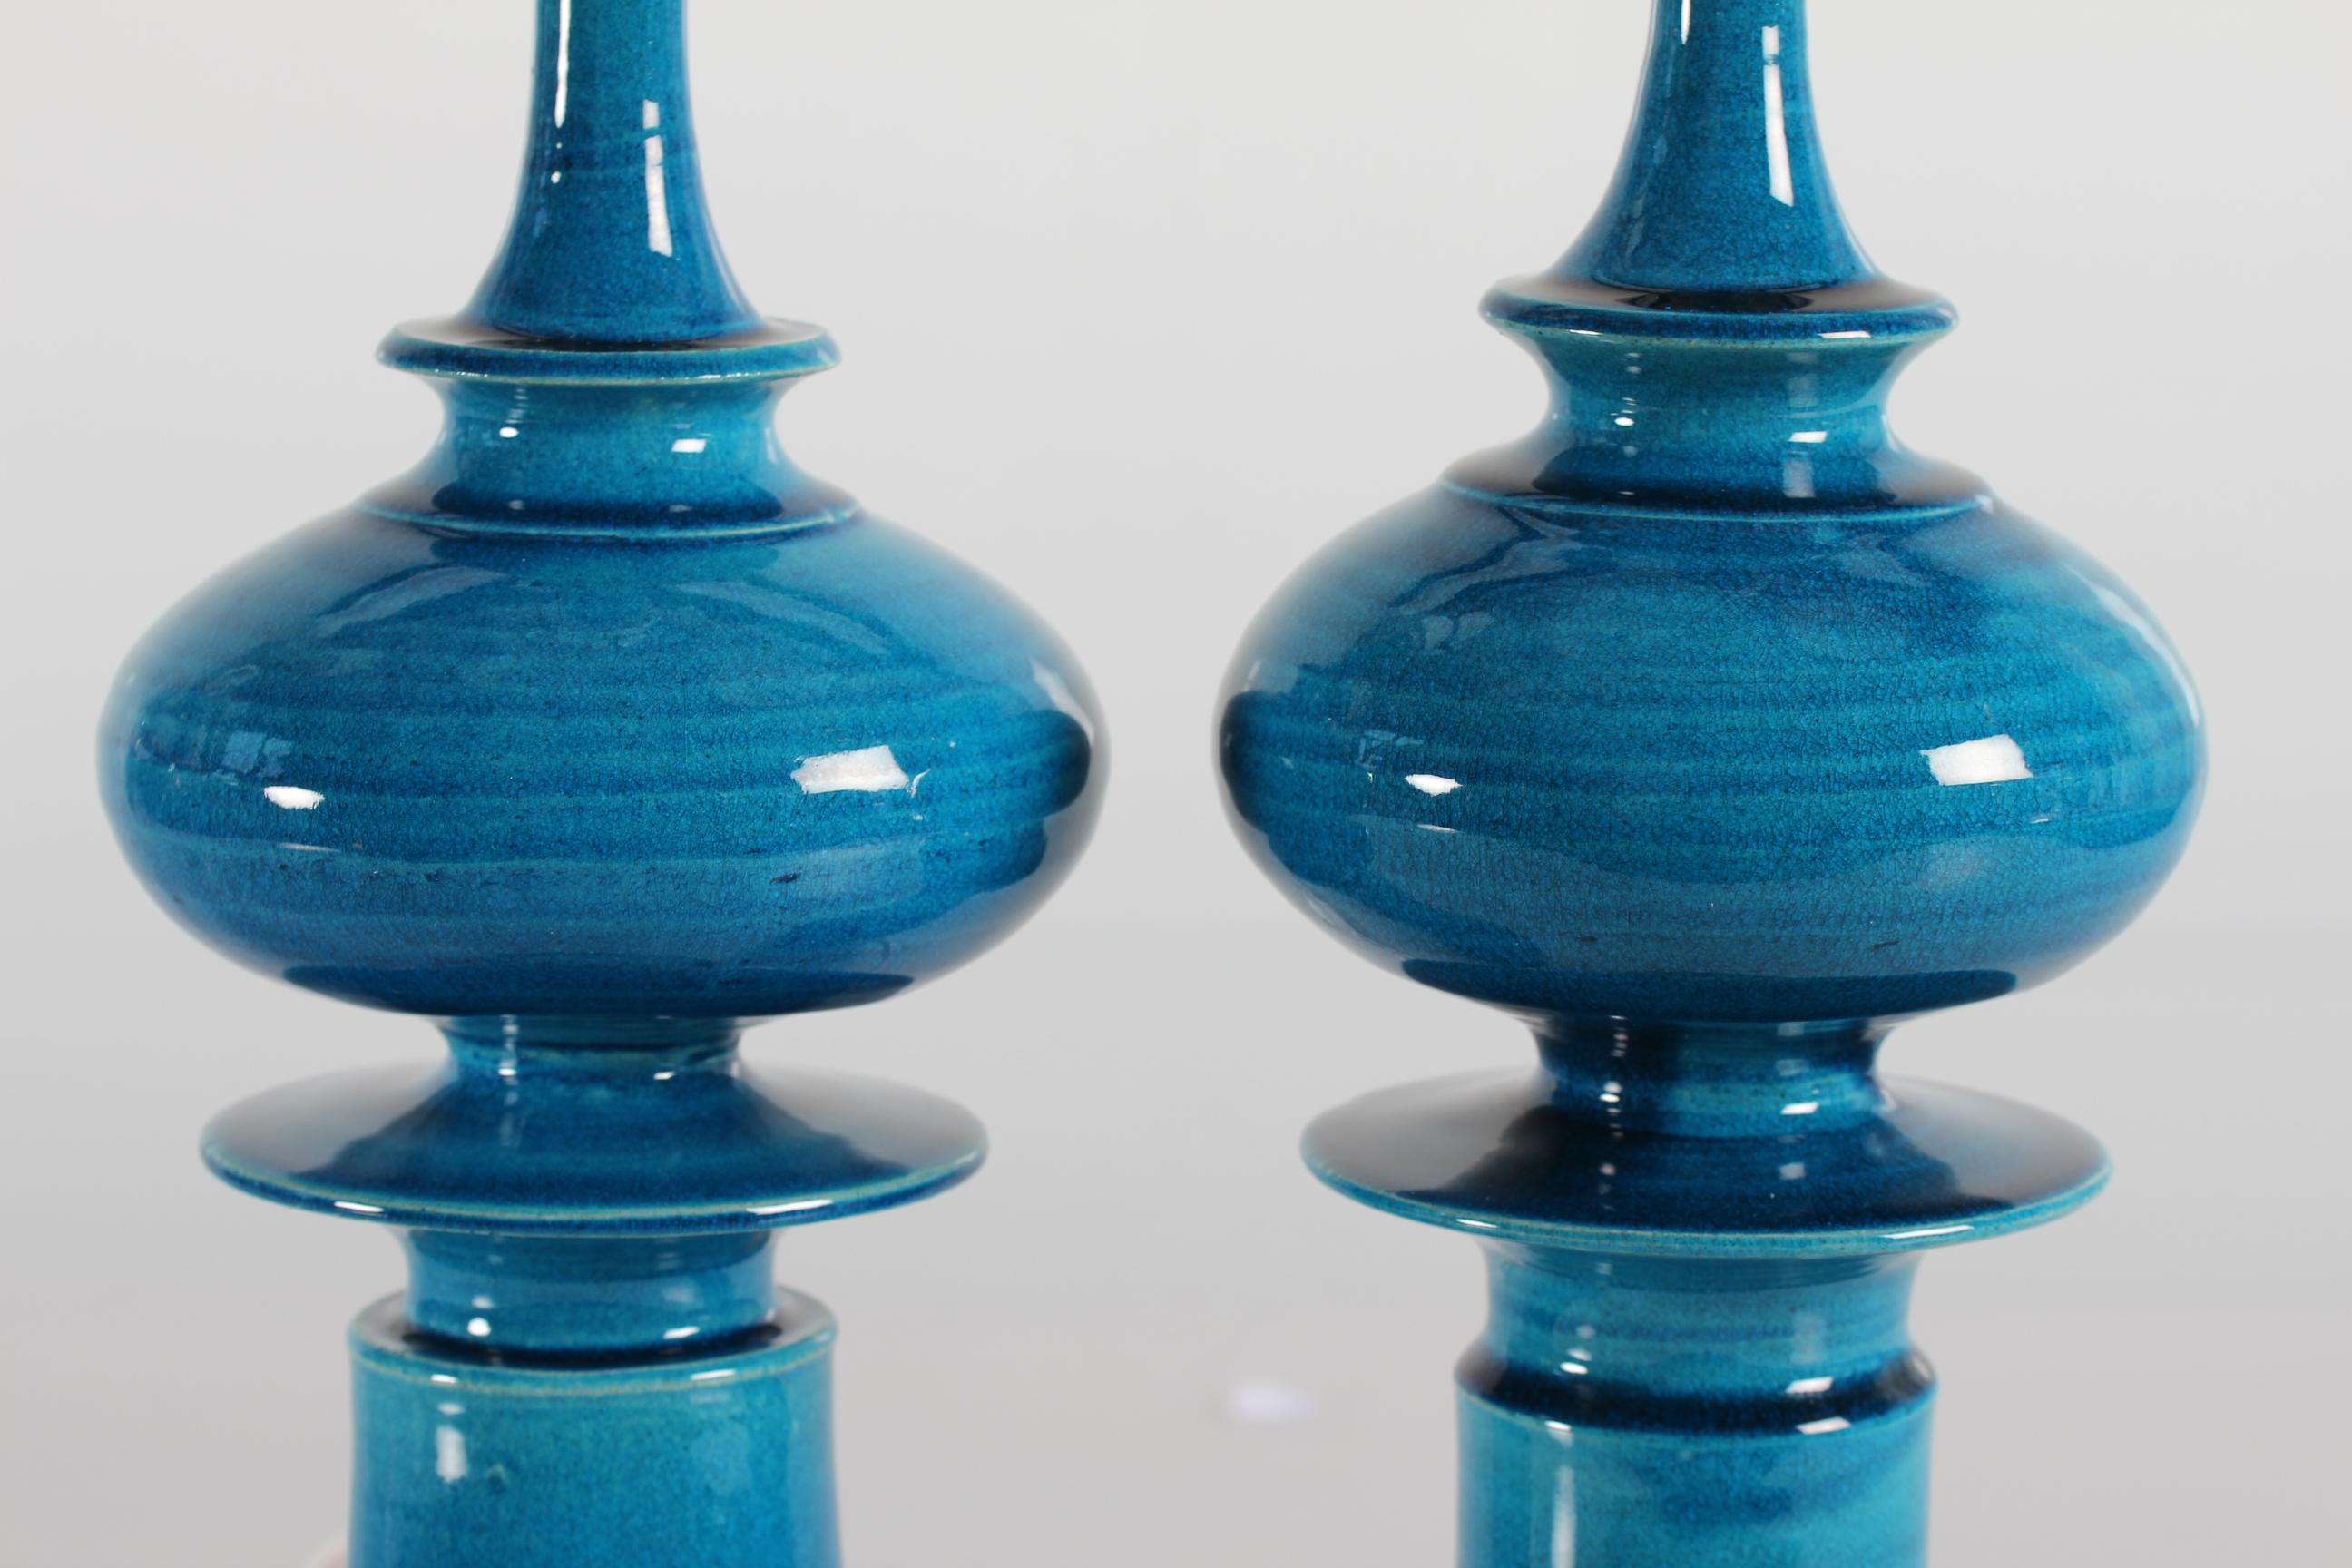 Pair of Kähler Tall Sculptural Turquoise Table Lamps by Poul Erik Eliasen, 1970s For Sale 5